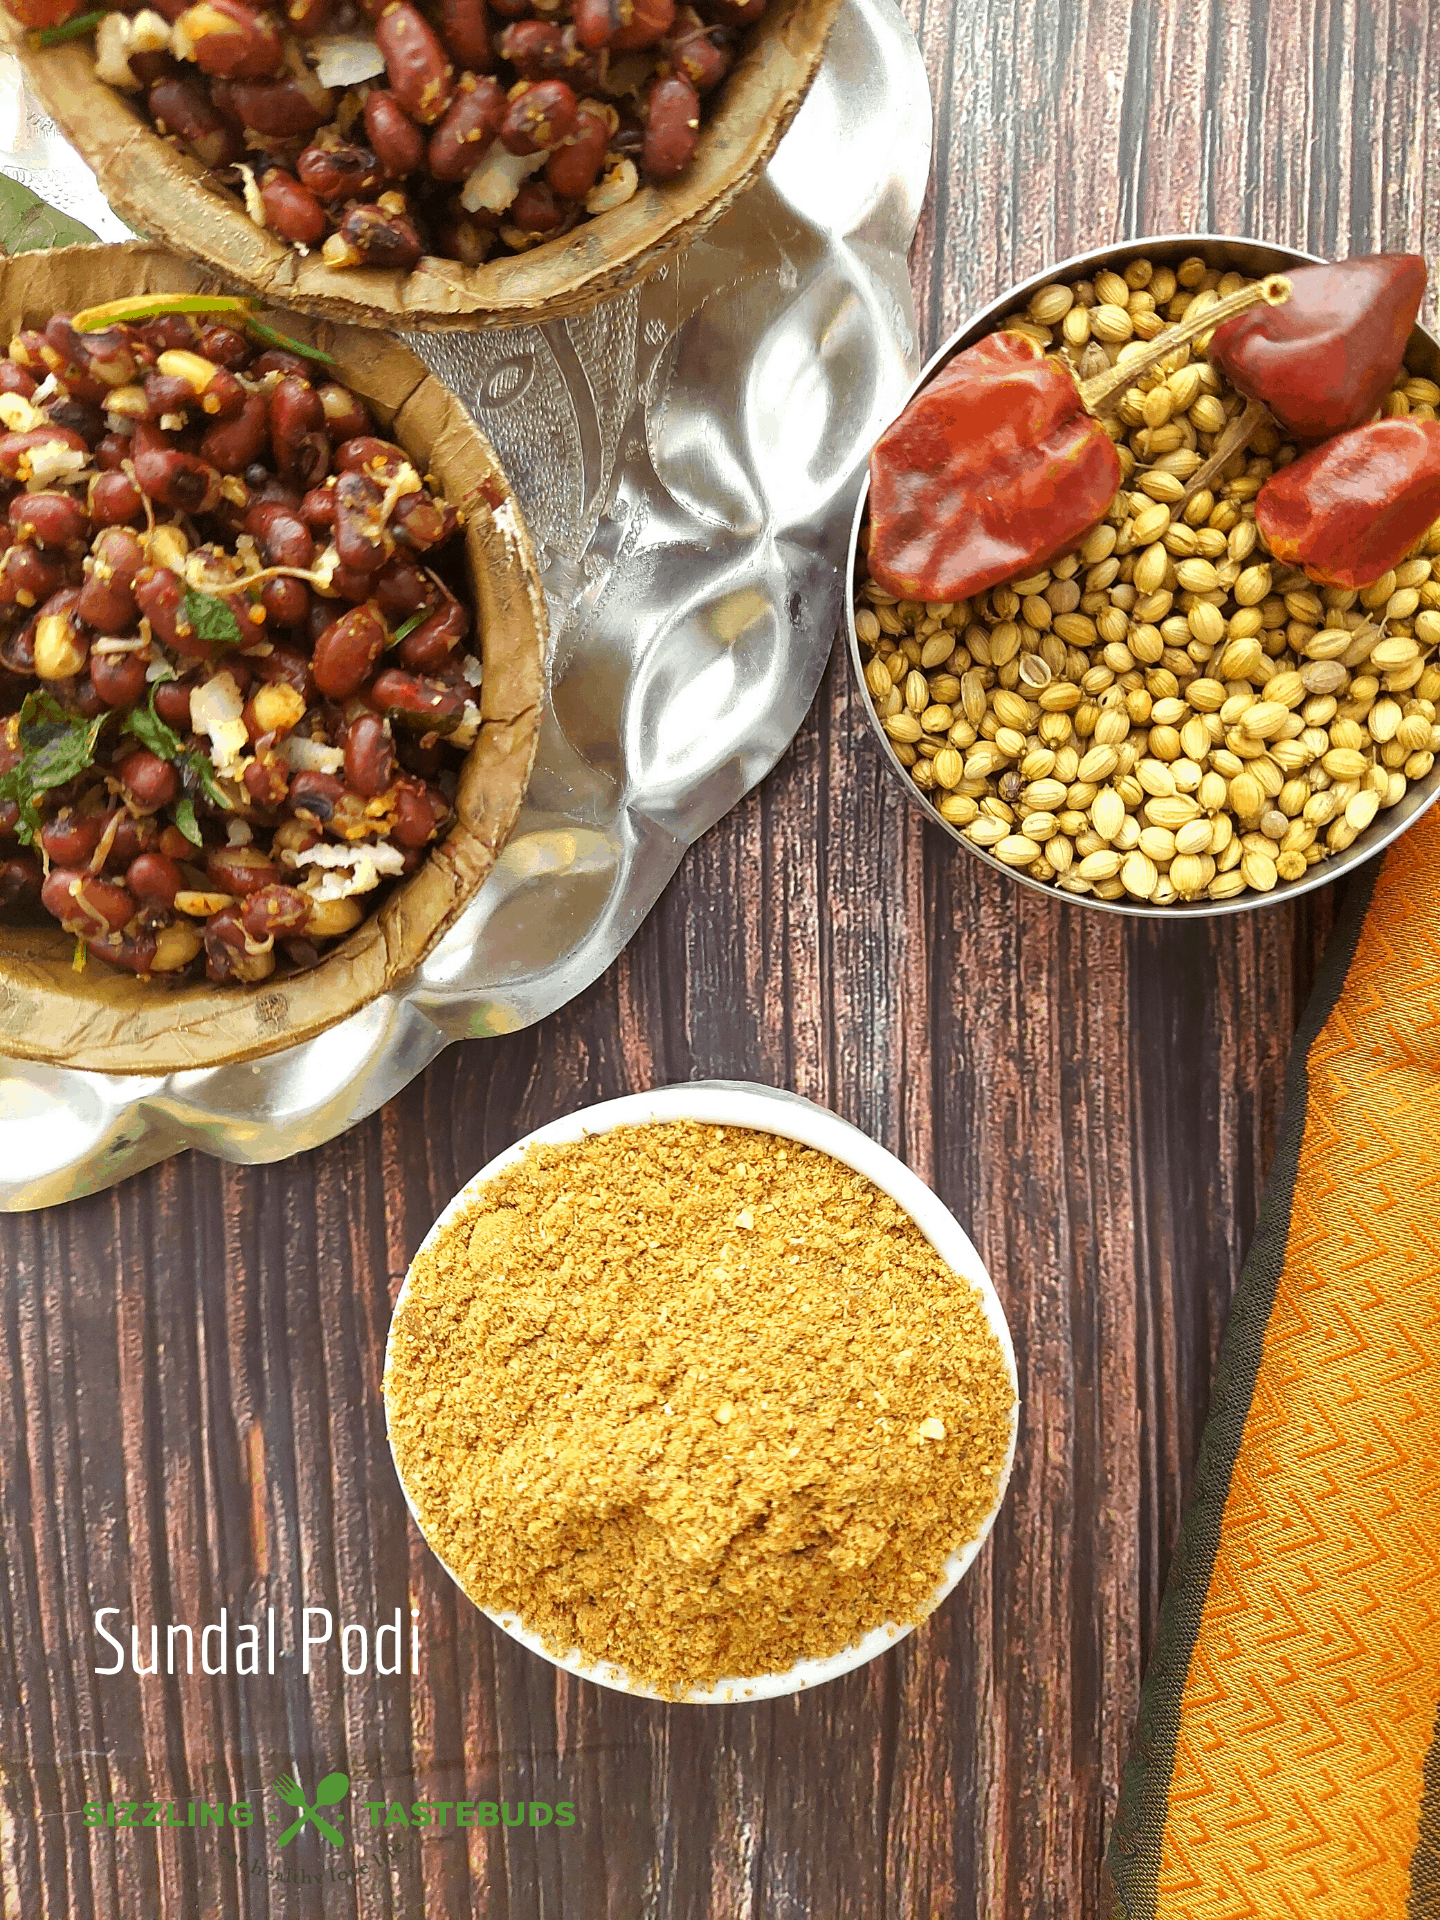 Sundal Podi is a ubiquitous spice powder mix used to season Sundal (or legume Stir fry). It can also be used in vegetable stir fries as an aromatic seasoning.